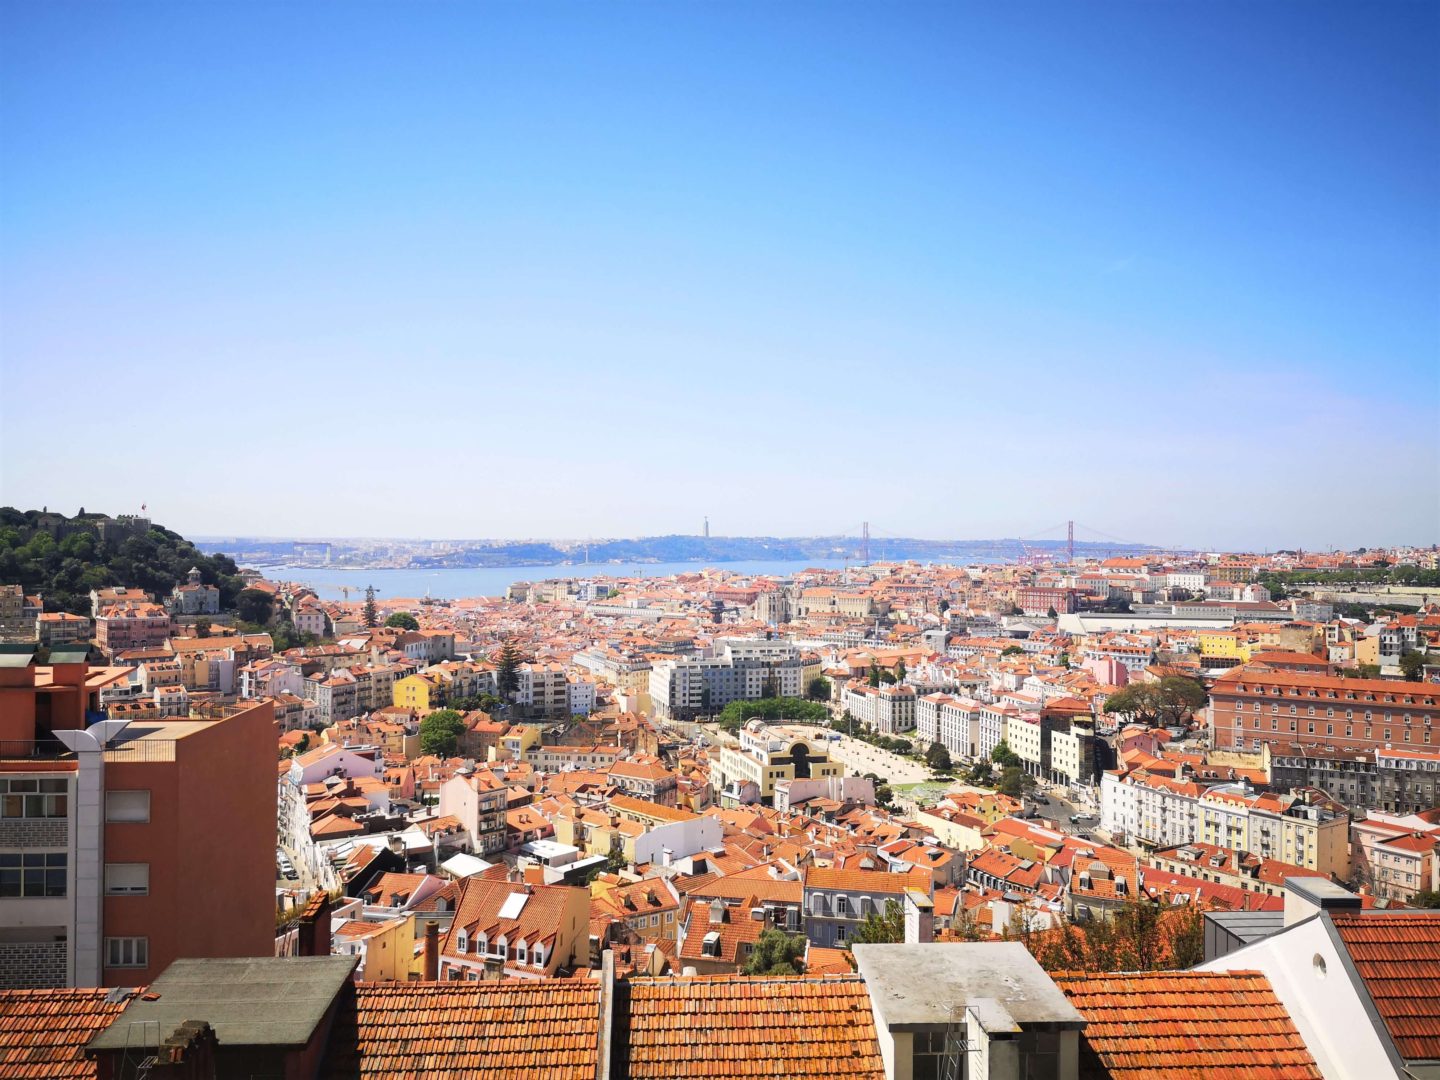 A photo from a high viewpoint above Lisbon, showing all the red roofs below. 